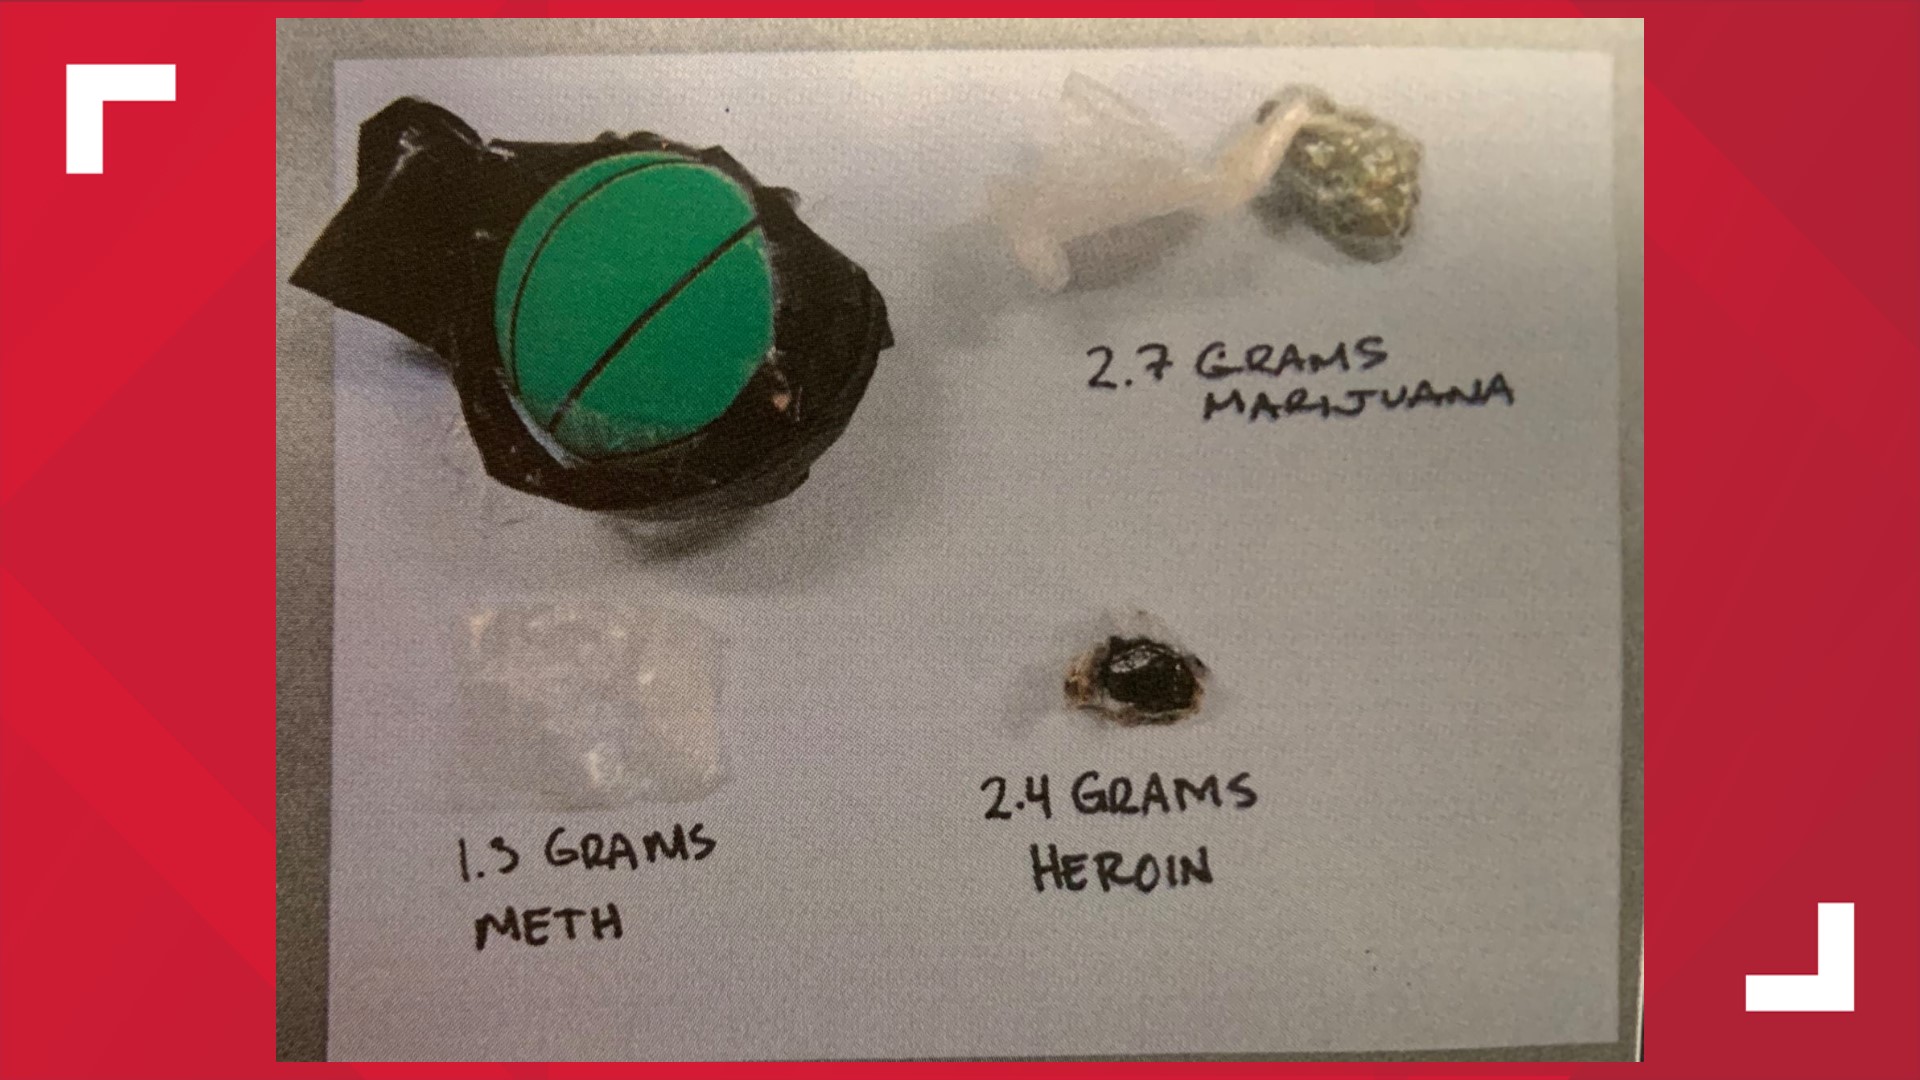 The two small, green basketballs were filled with a mix of drugs including marijuana, heroin, and methamphetamines.